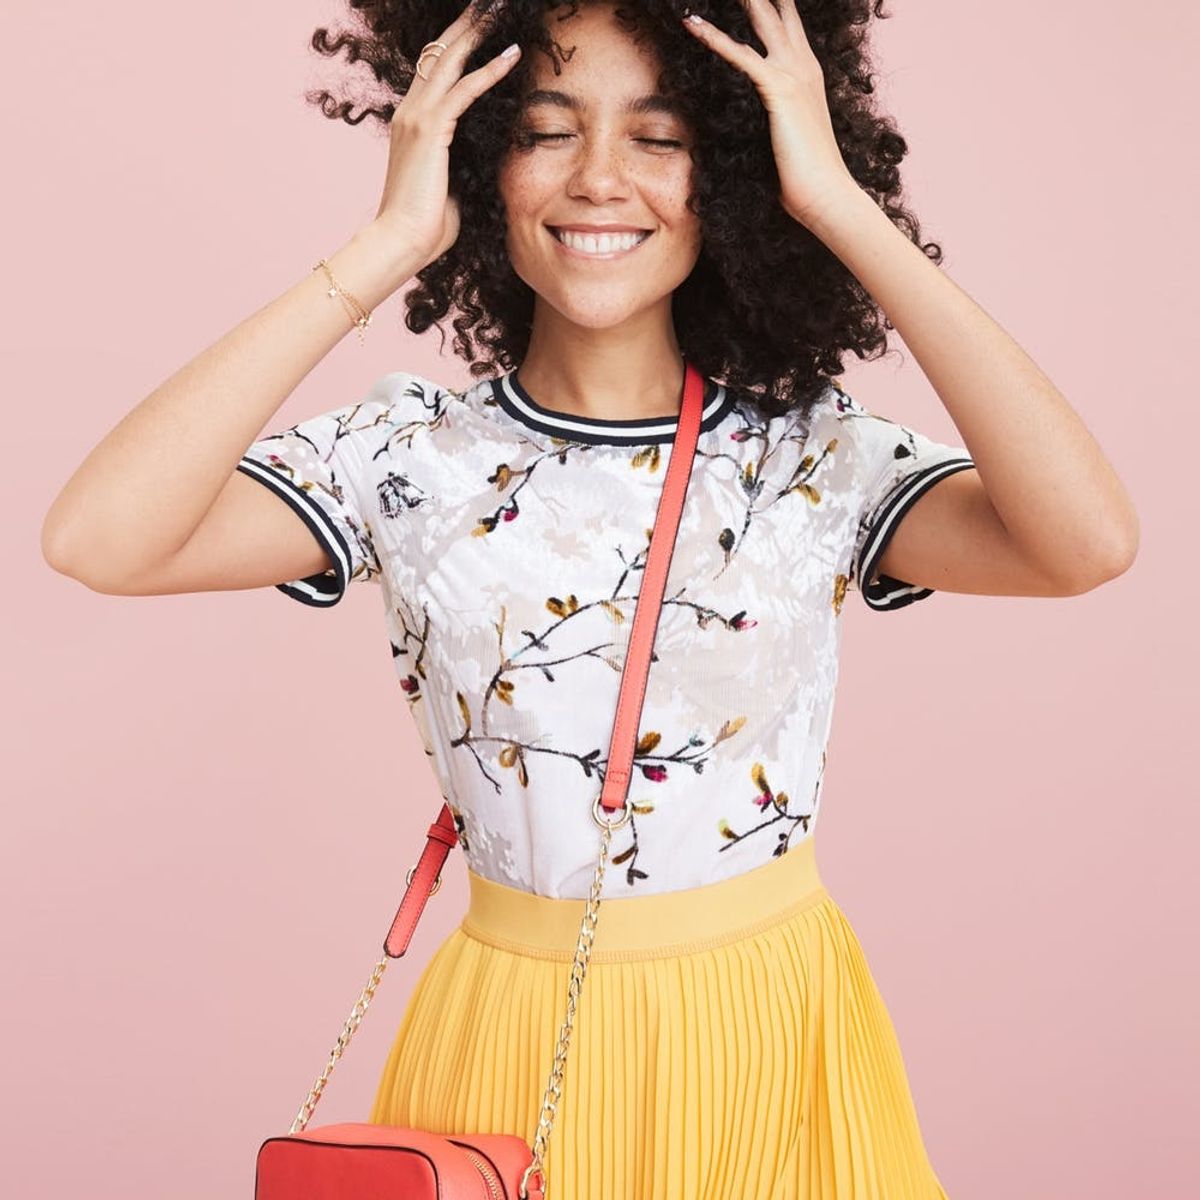 Your First Look at Target’s A New Day Women’s Clothing Has Arrived